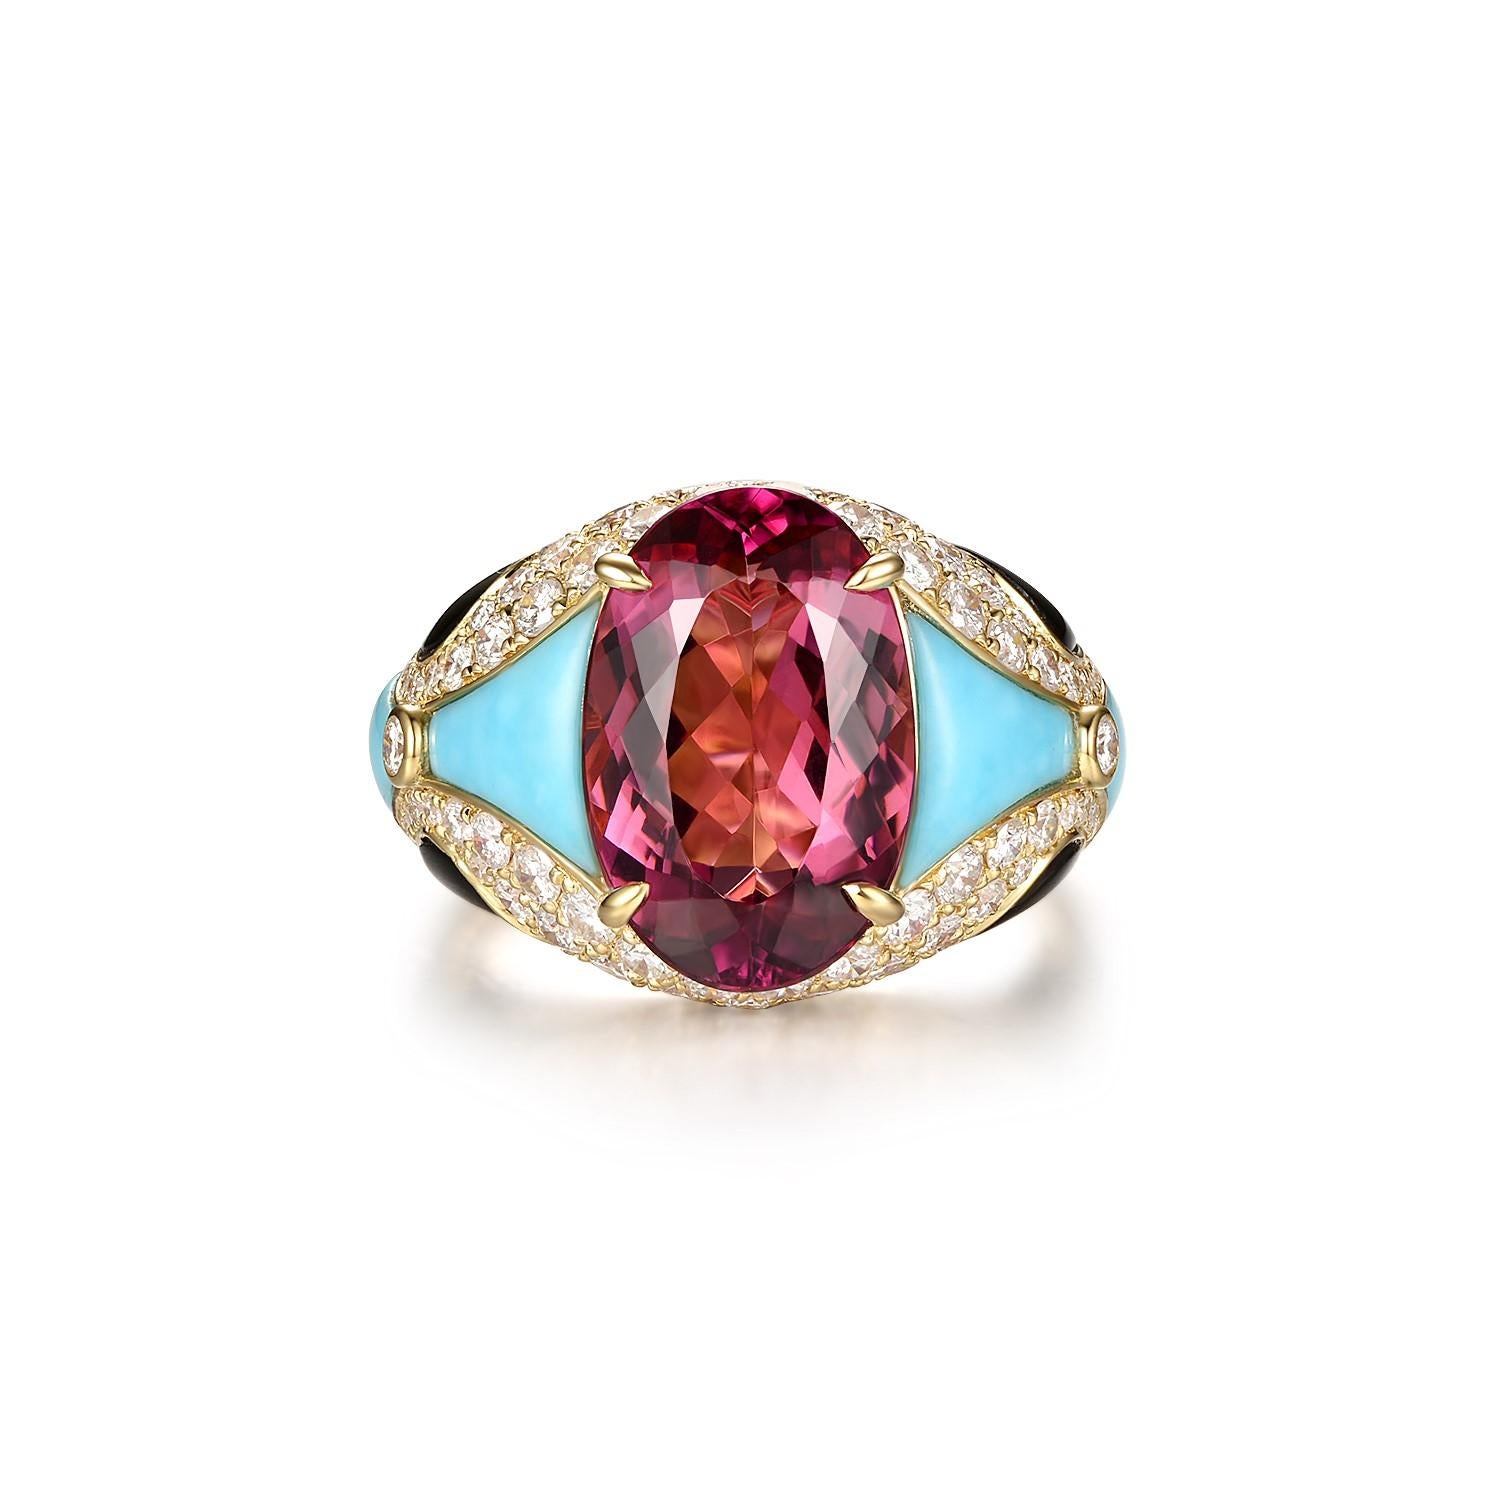 This ring is a true work of art, boasting a captivating fusion of vibrant colors and luxurious materials. Crafted from 18 karat yellow gold, its bold and sophisticated design features a magnificent 5.30 carat rubellite at its center. The rubellite's